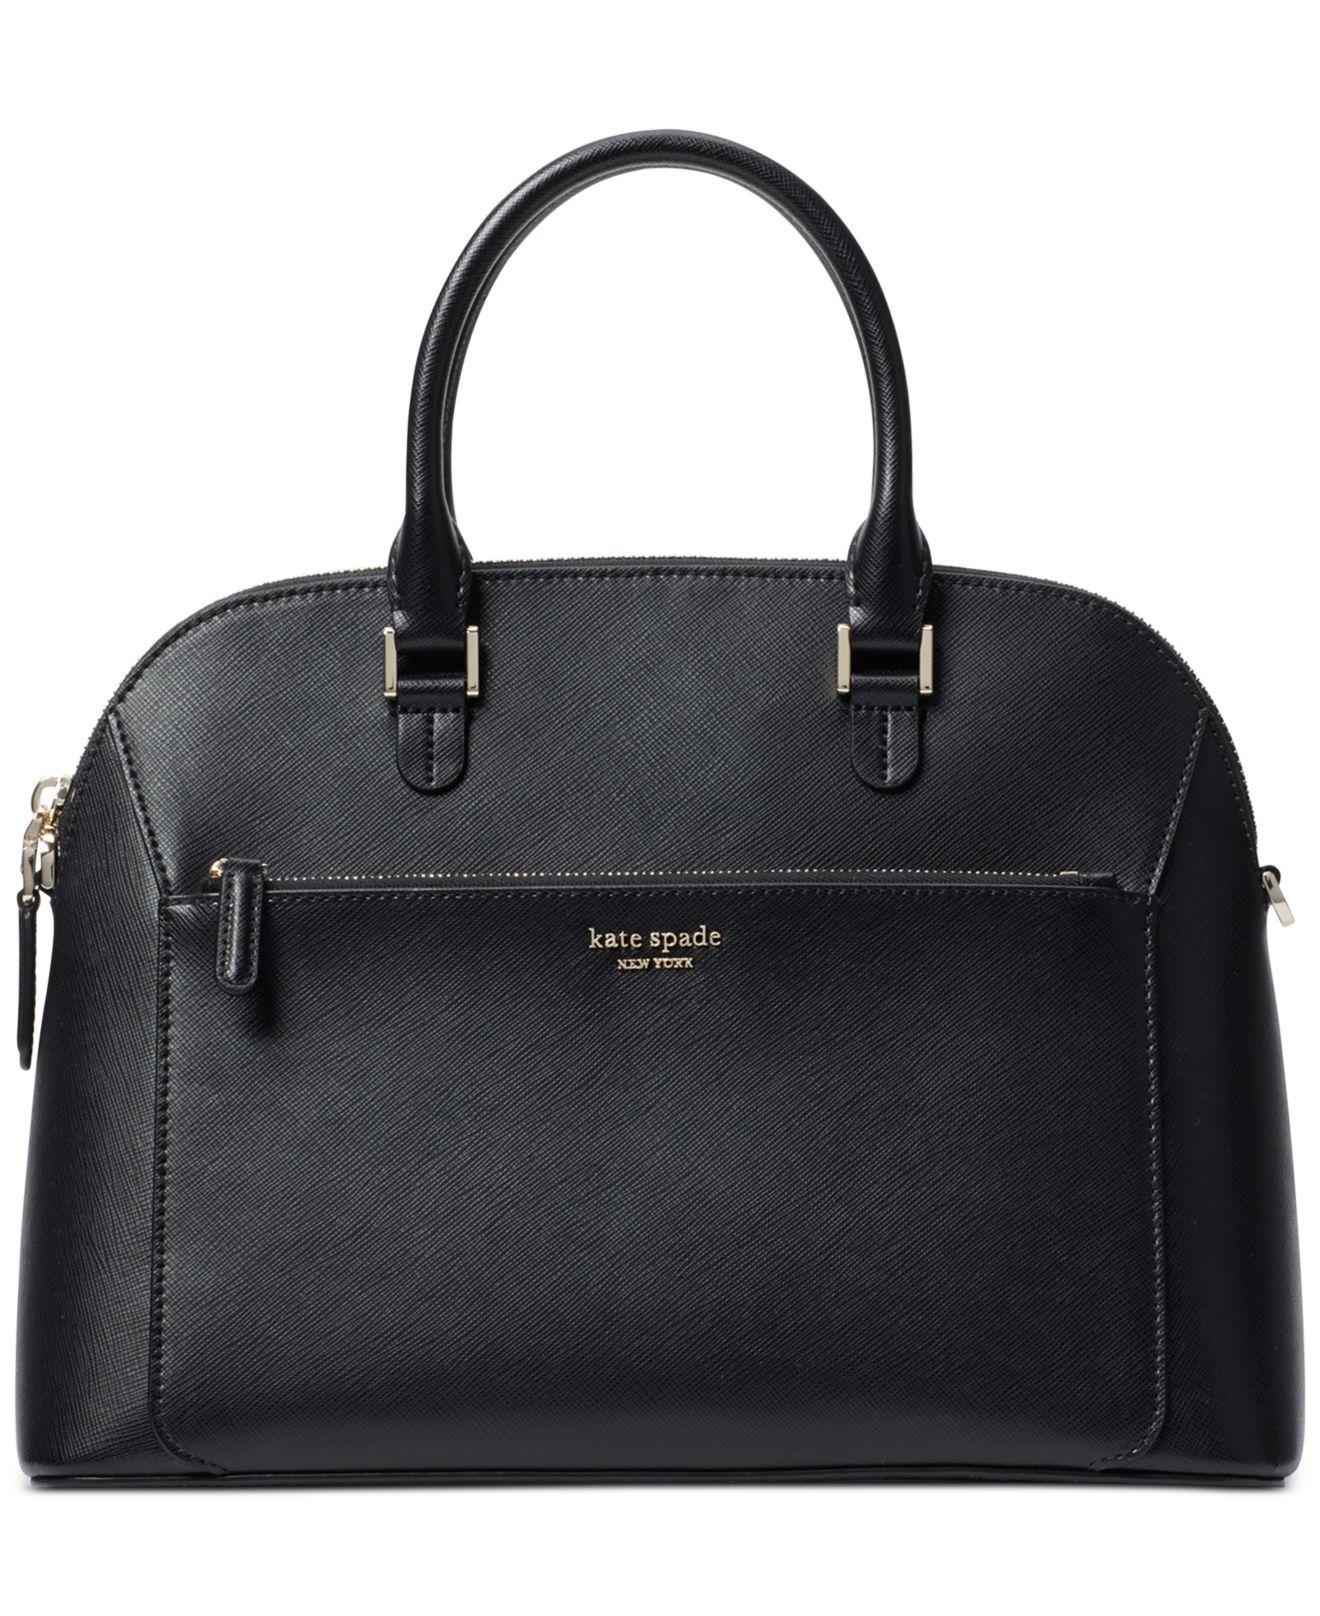 Kate Spade Leather Small Dome Satchel in Black/Gold (Black) - Lyst